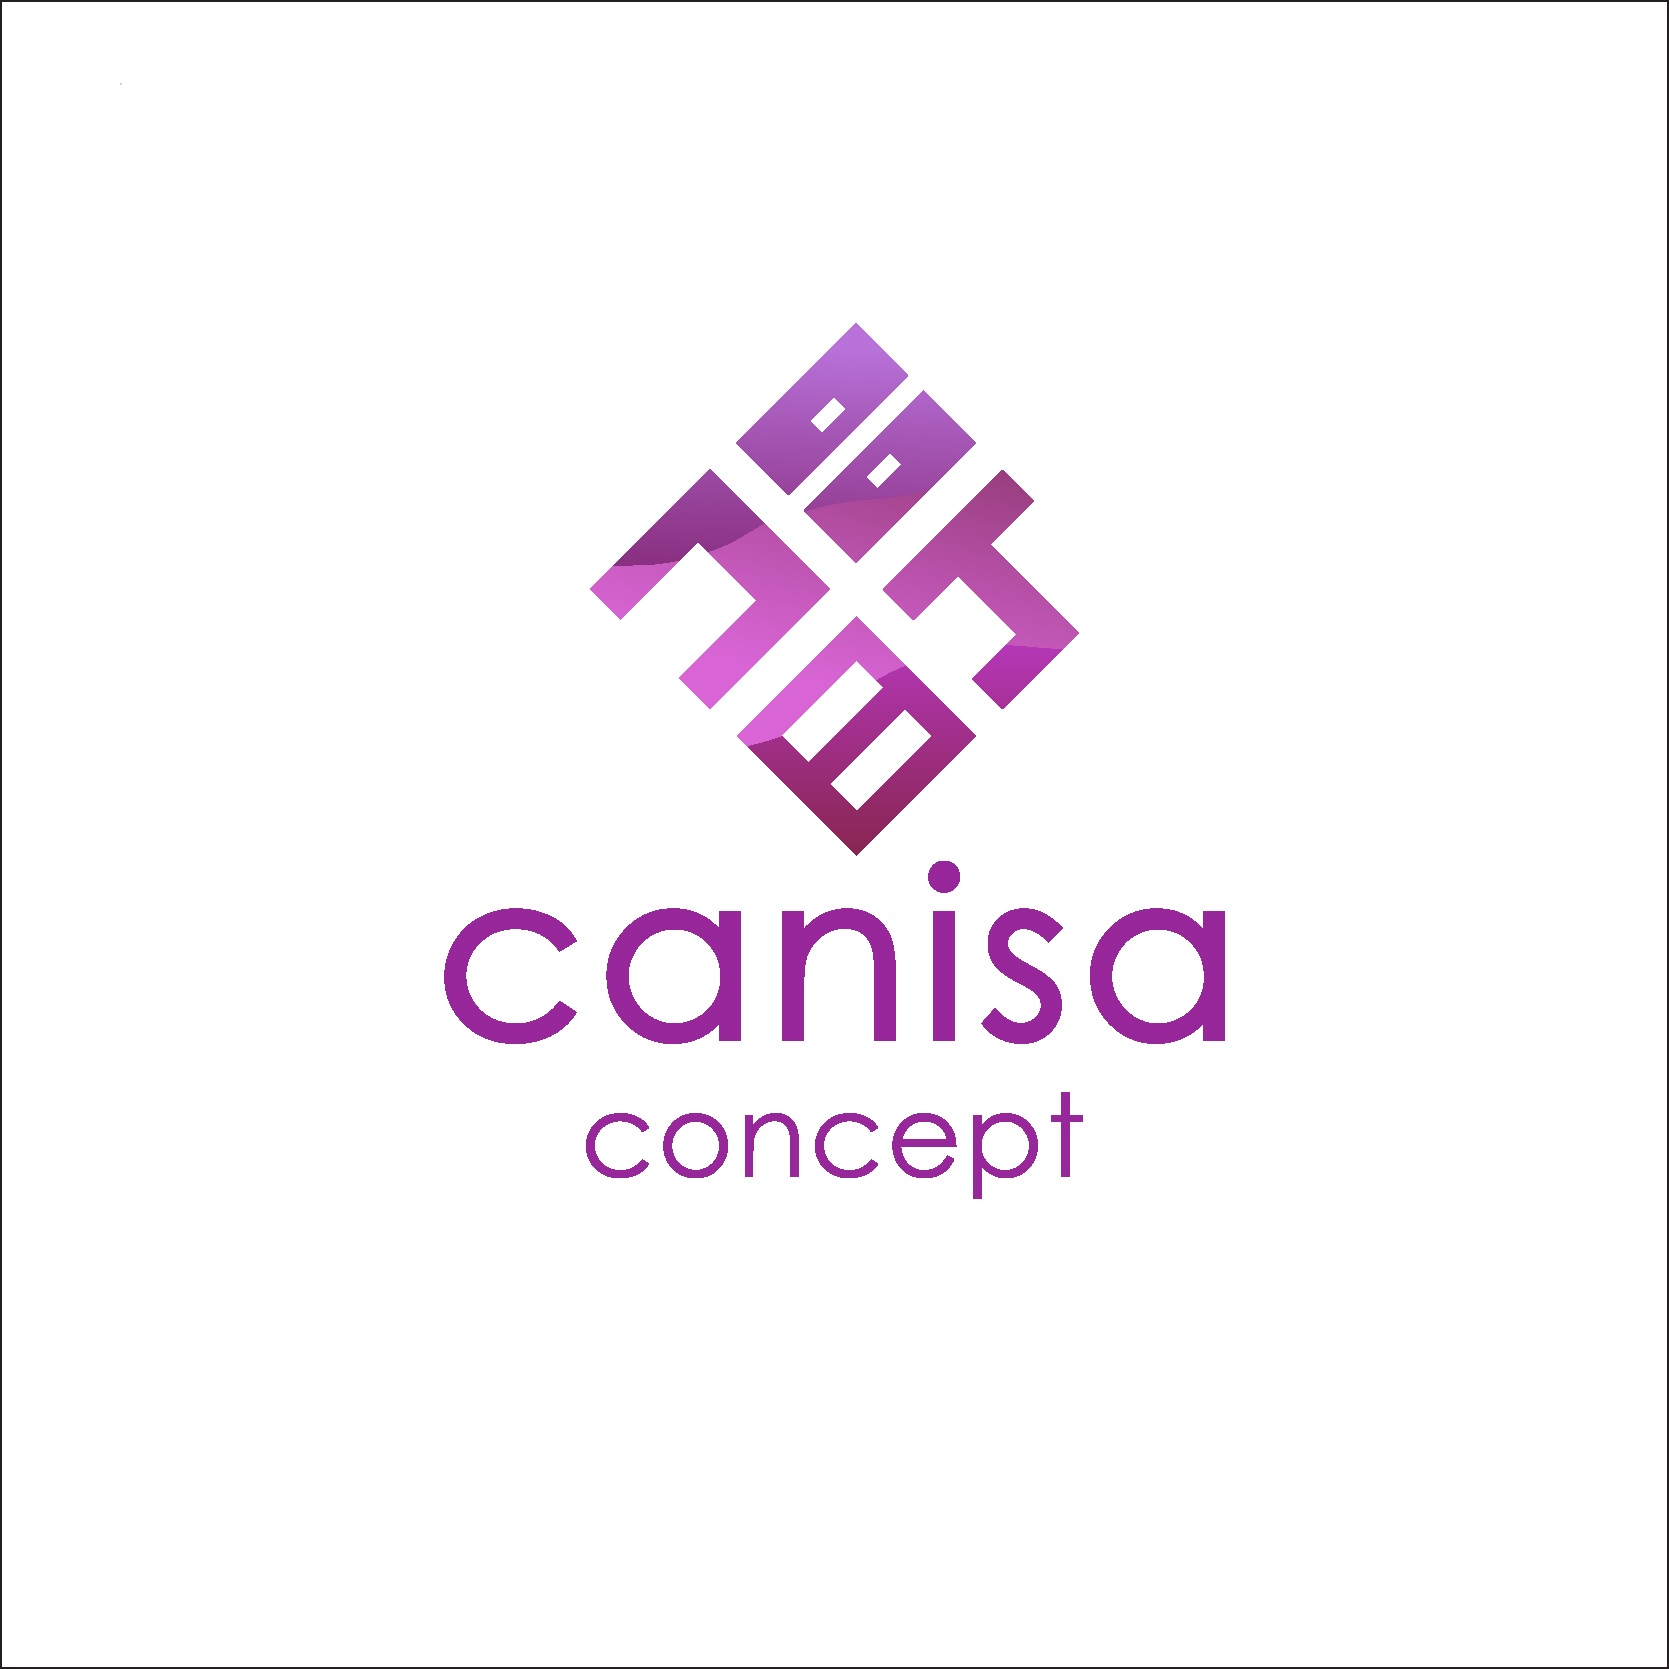 canisaconcept